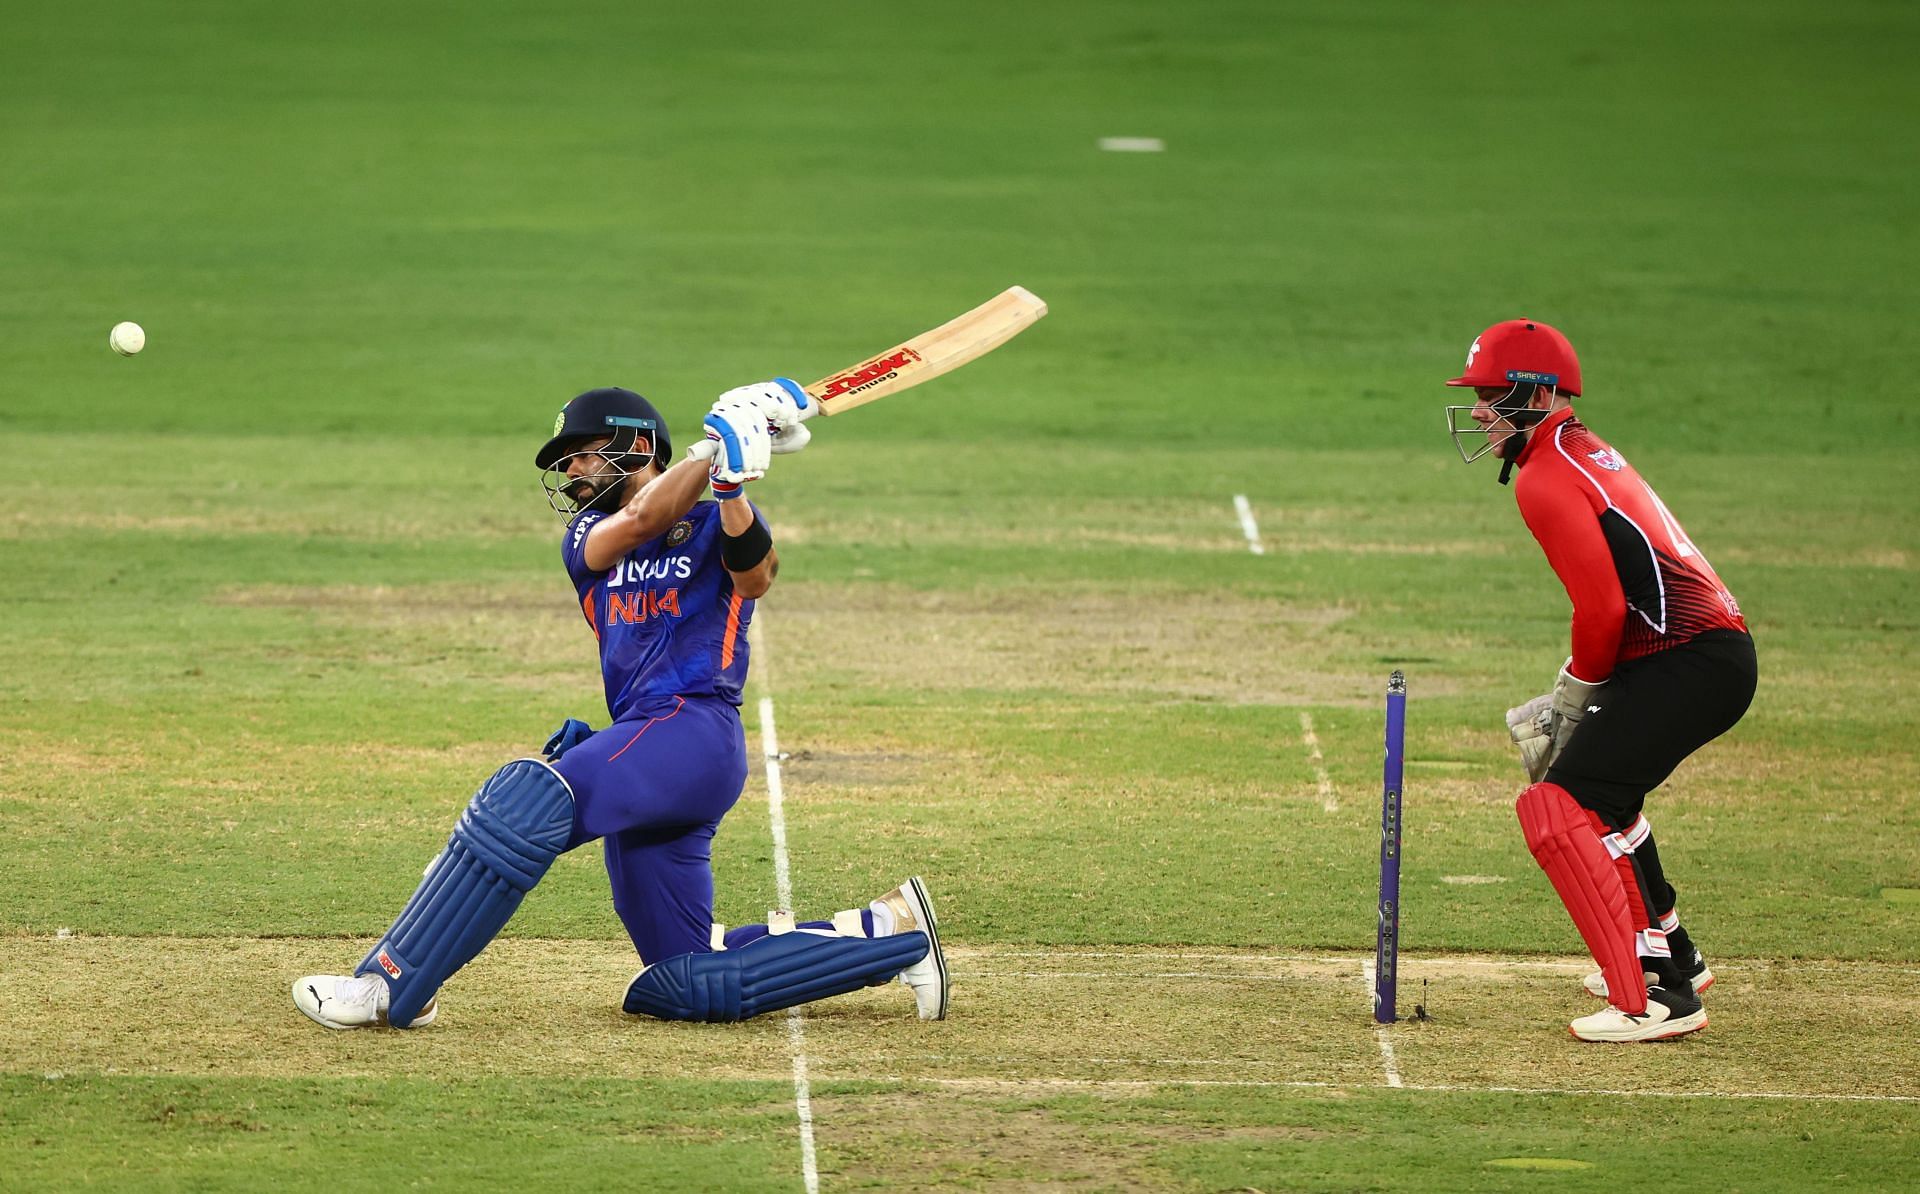 Virat seemed confident in the middle against the Hong Kong cricket team (Image: Getty)